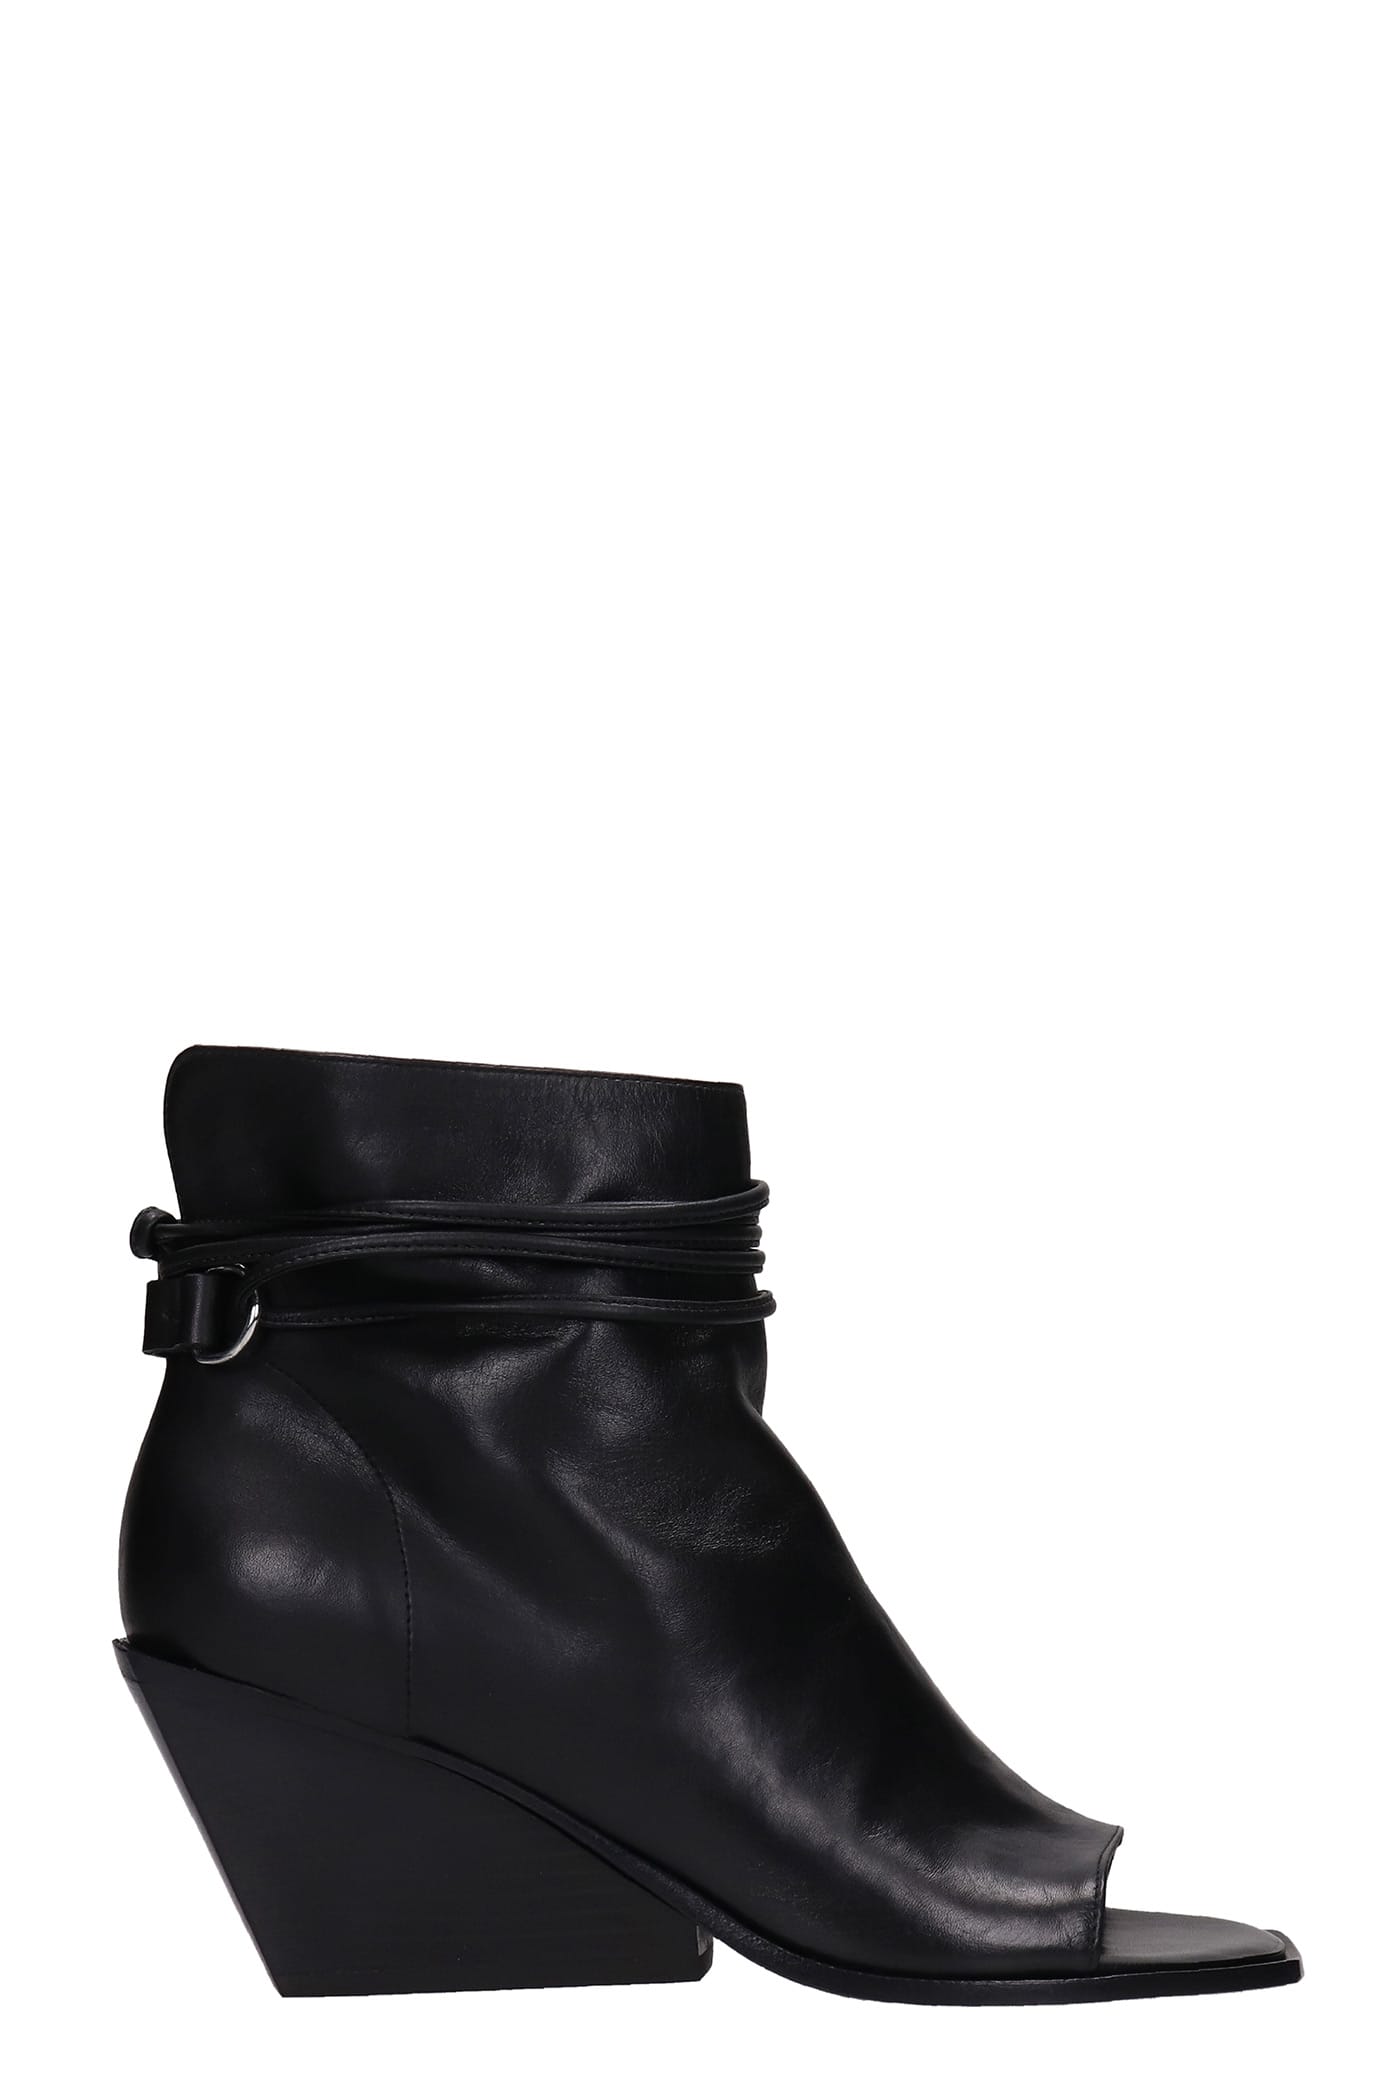 Elena Iachi High Heels Ankle Boots In Black Leather